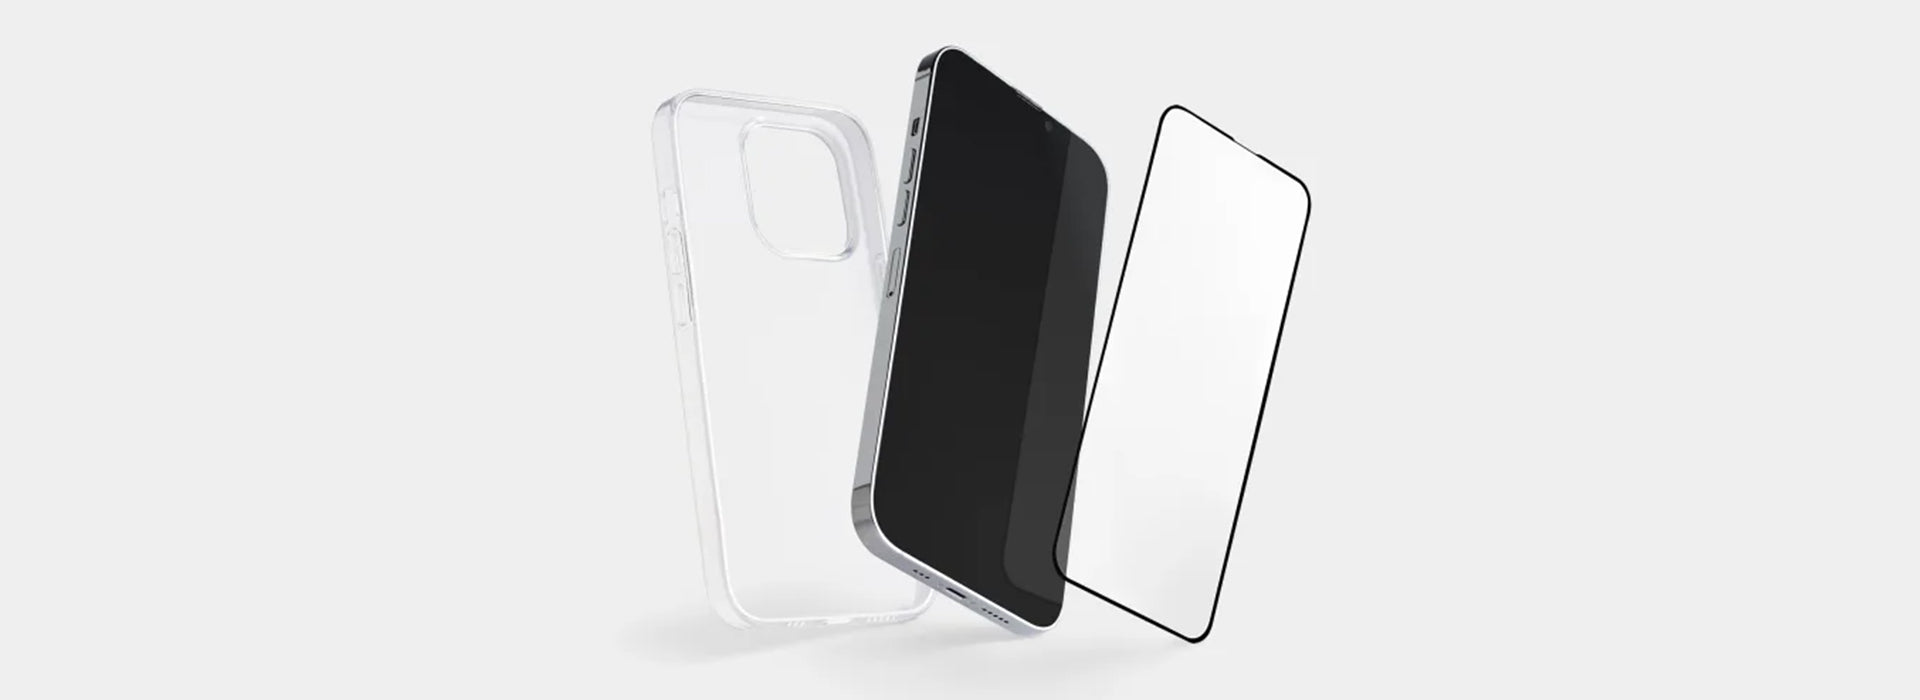 Screen Protectors vs. Cases: Which is Better?